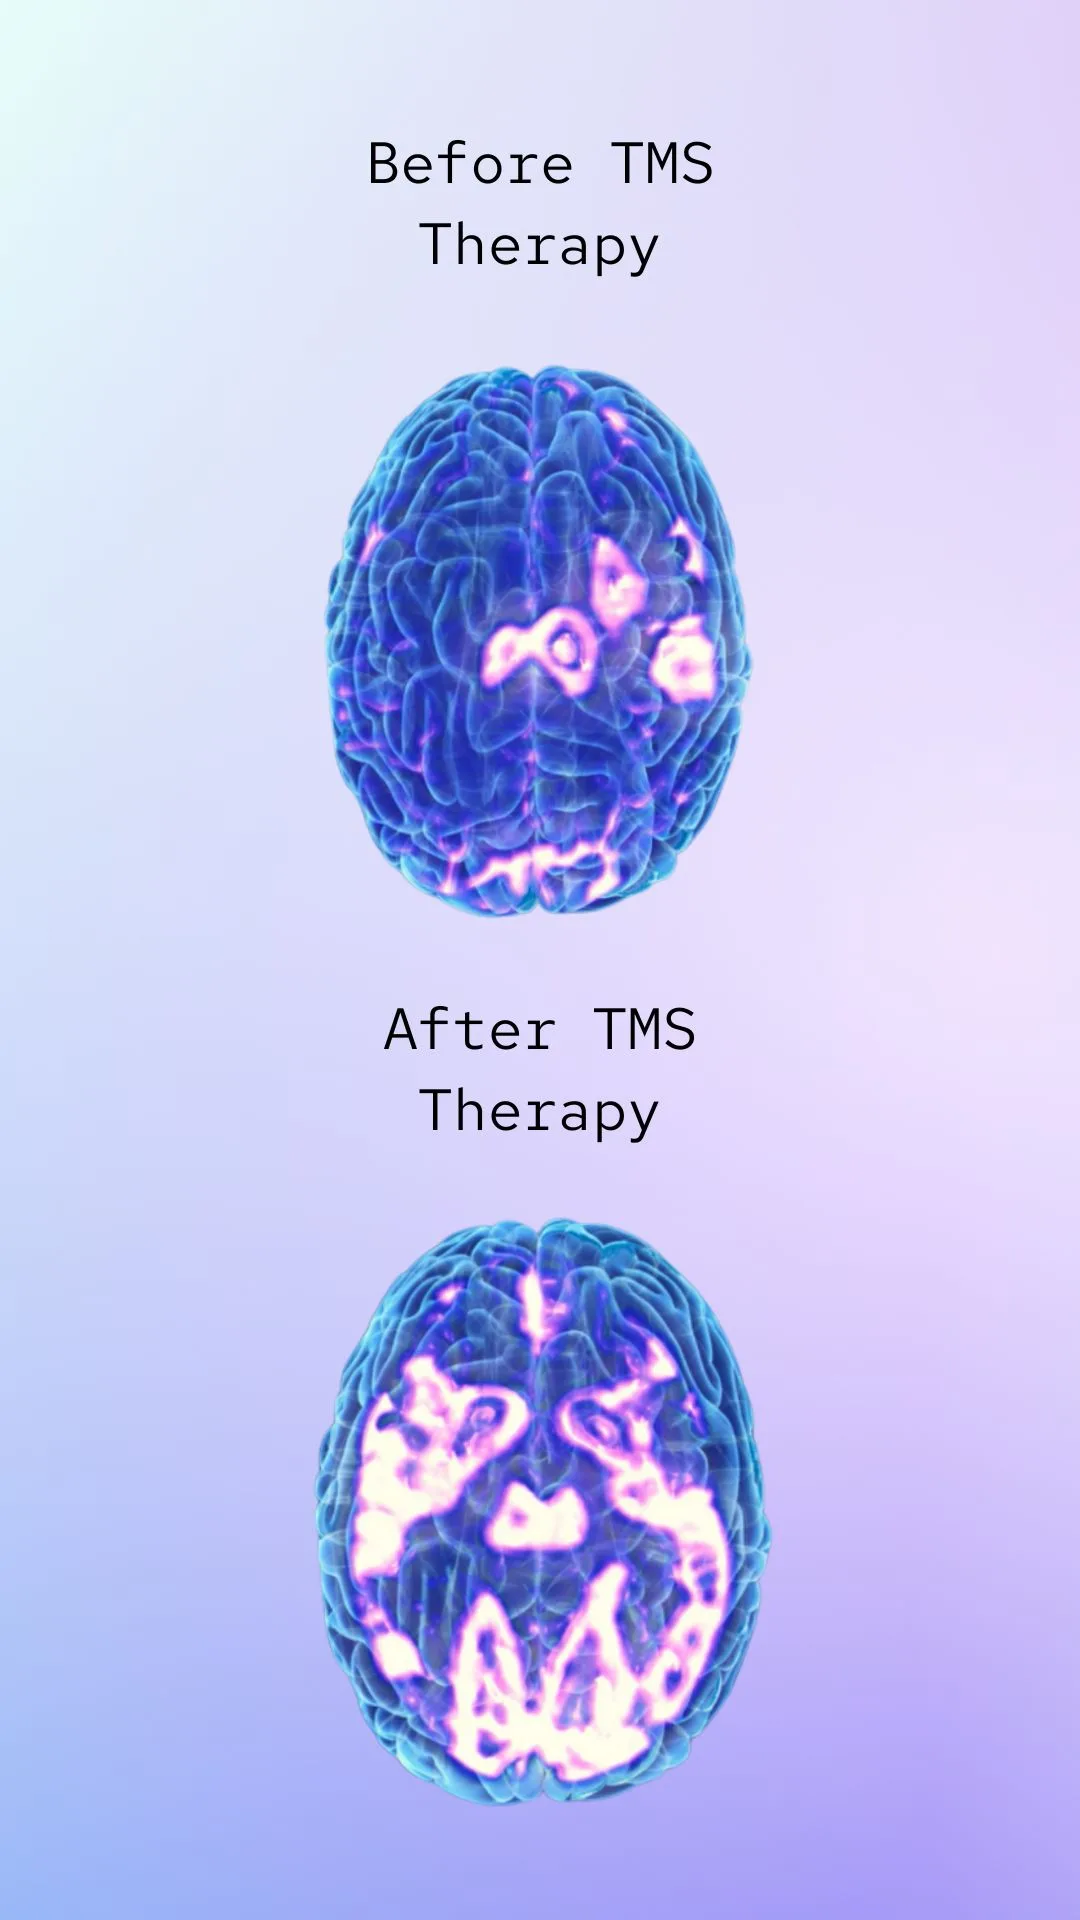 the brain before and after TMS therapy depression treatment los angeles ca